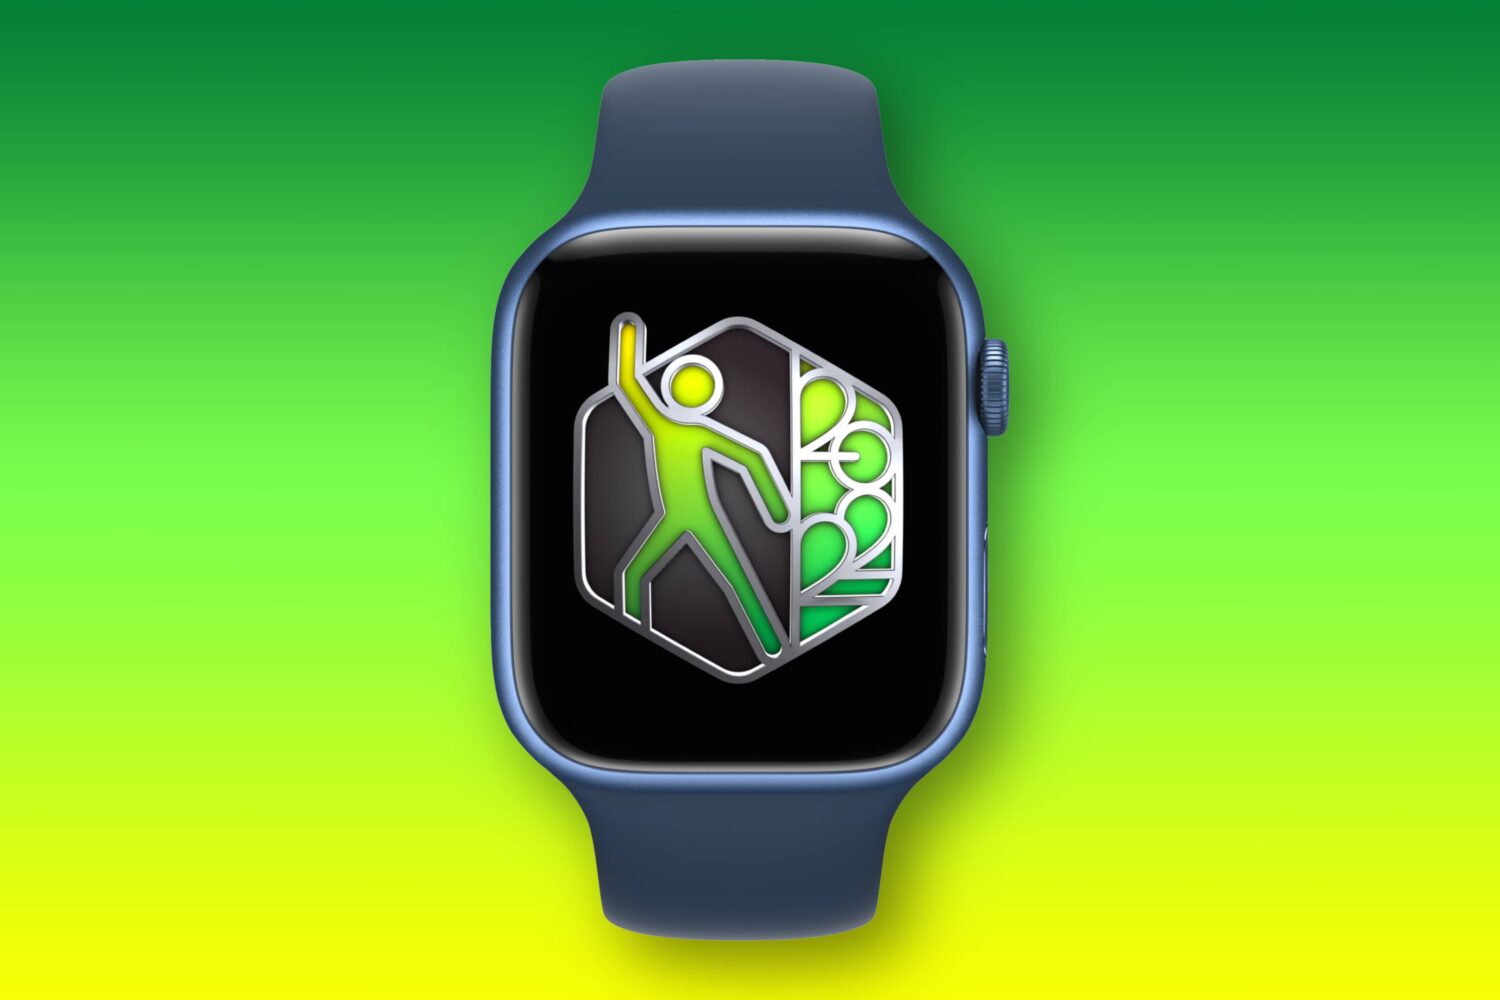 Featured image showing an exclusive virtual award on Apple Watch earned by completing the 2022 International Dance Day activity challenge